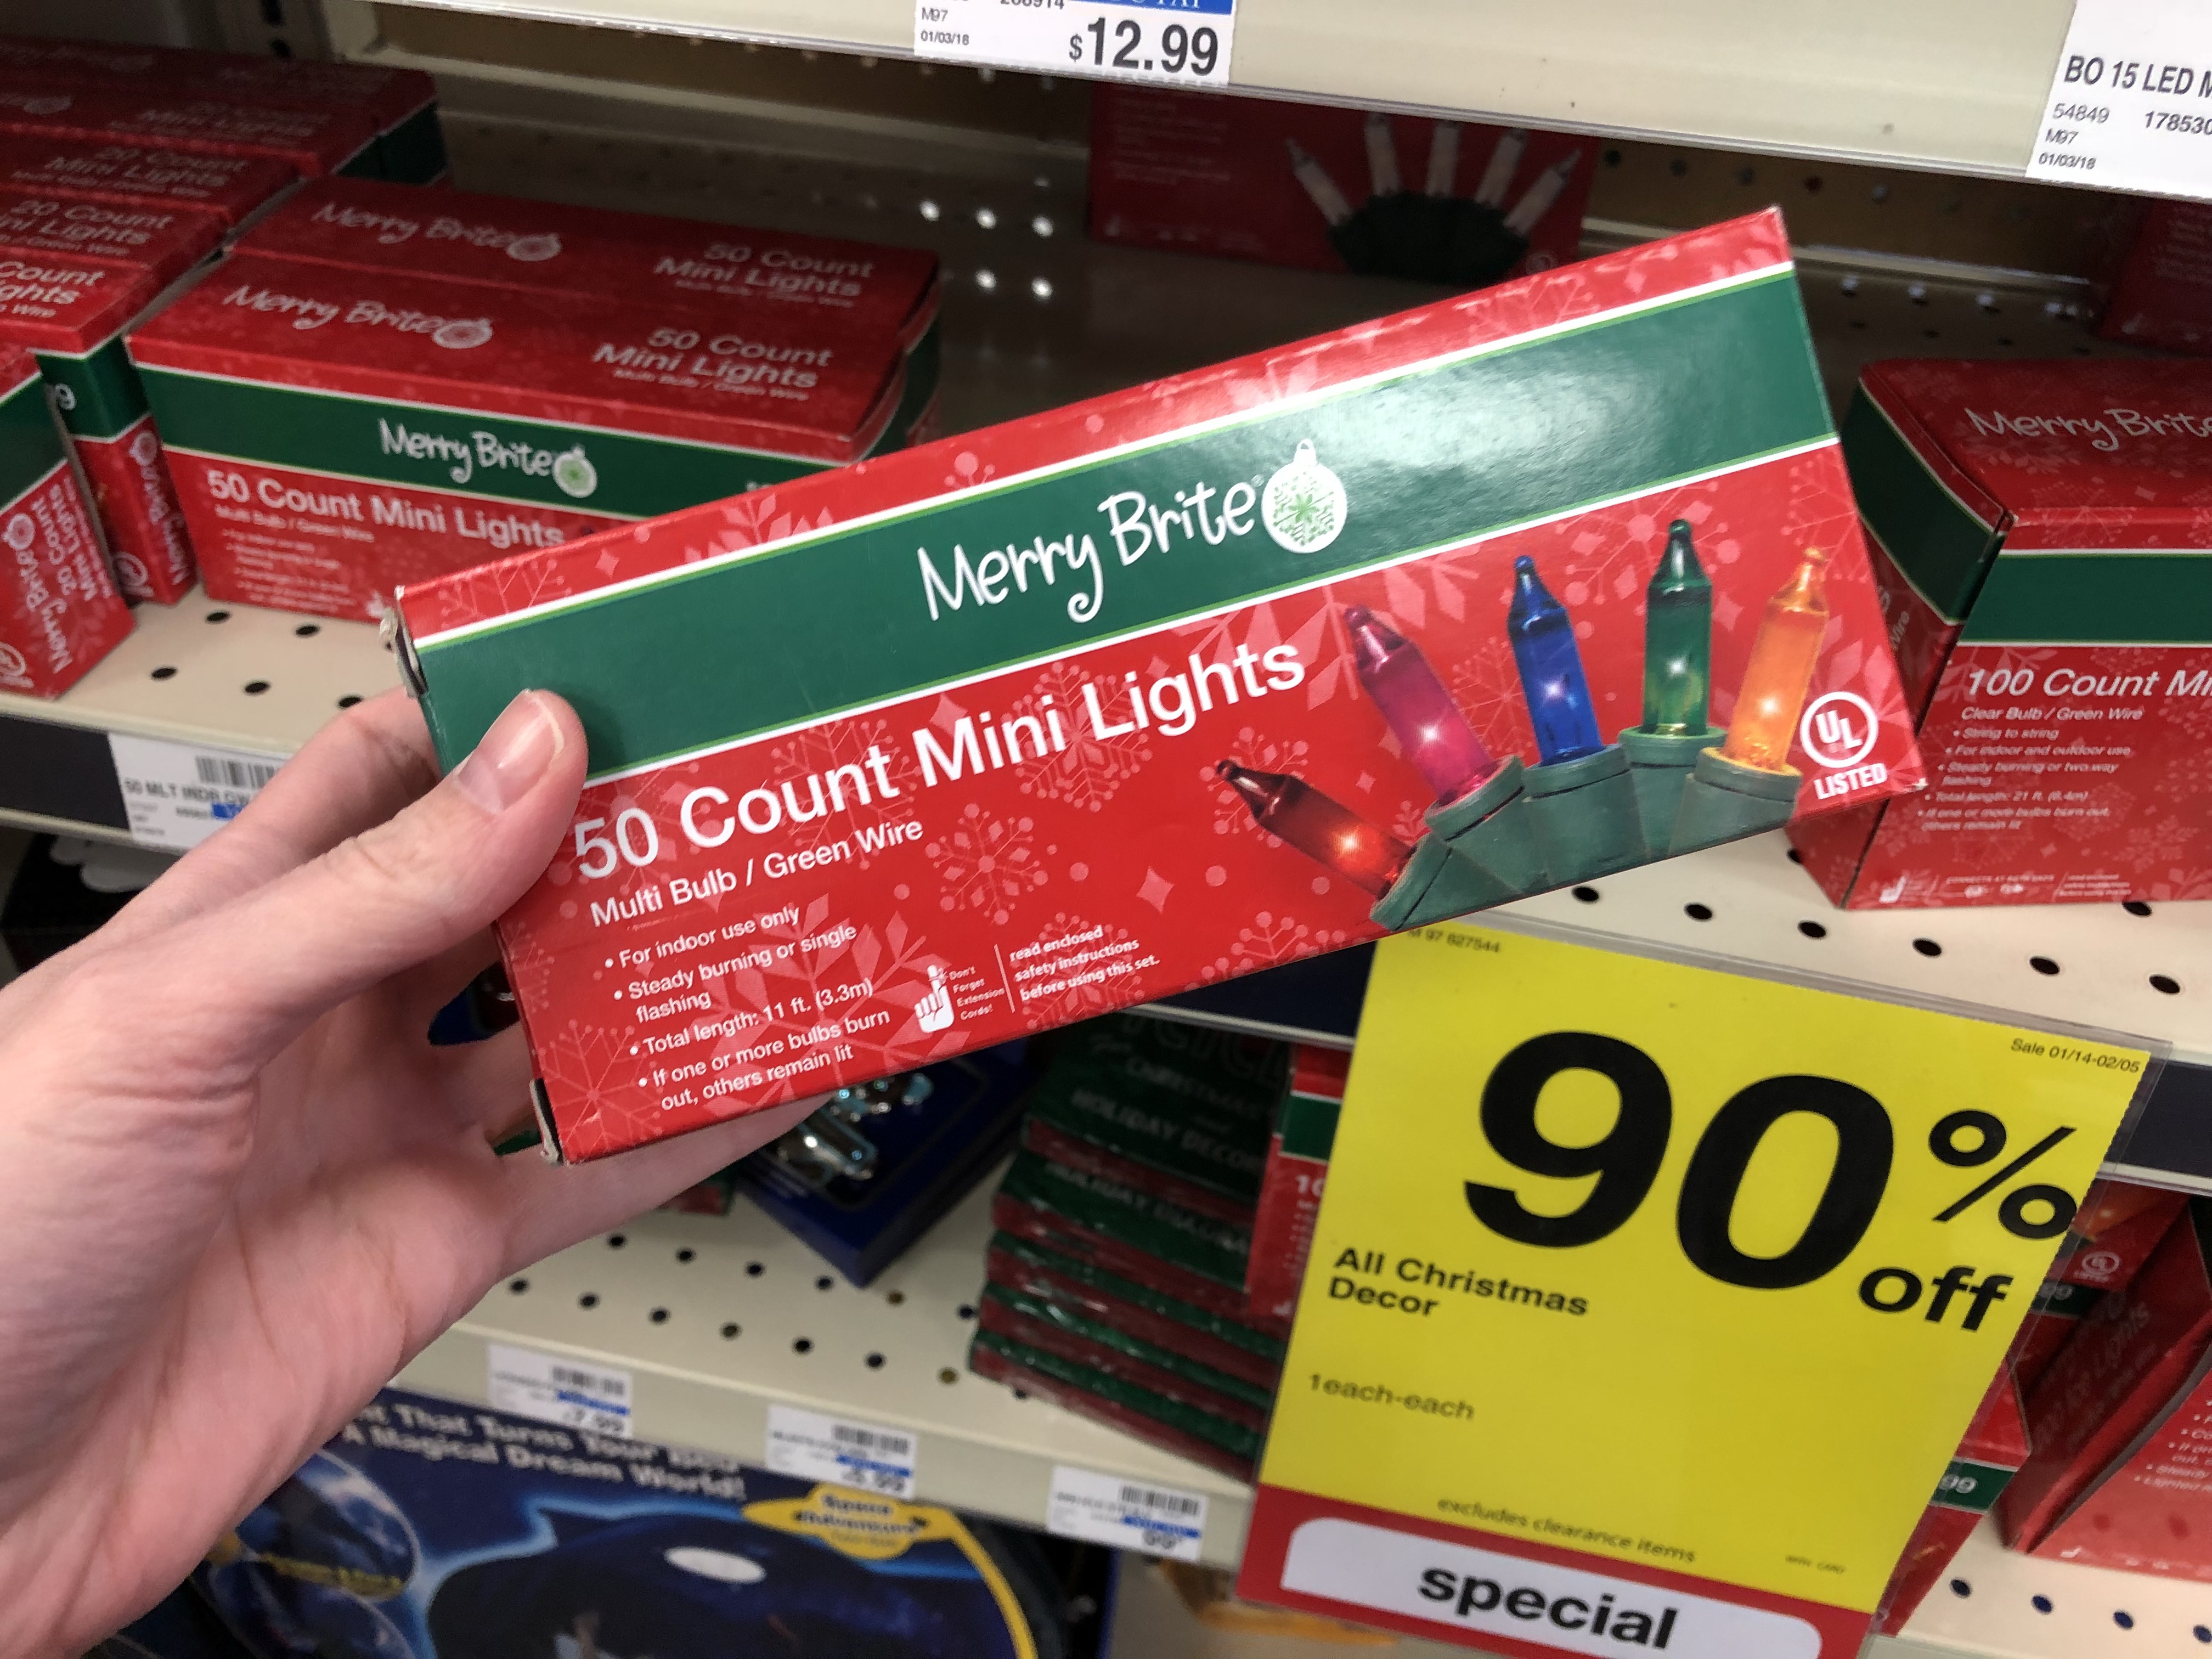 23 money saving tips you may not know about shopping at cvspharmacy – after holiday clearance